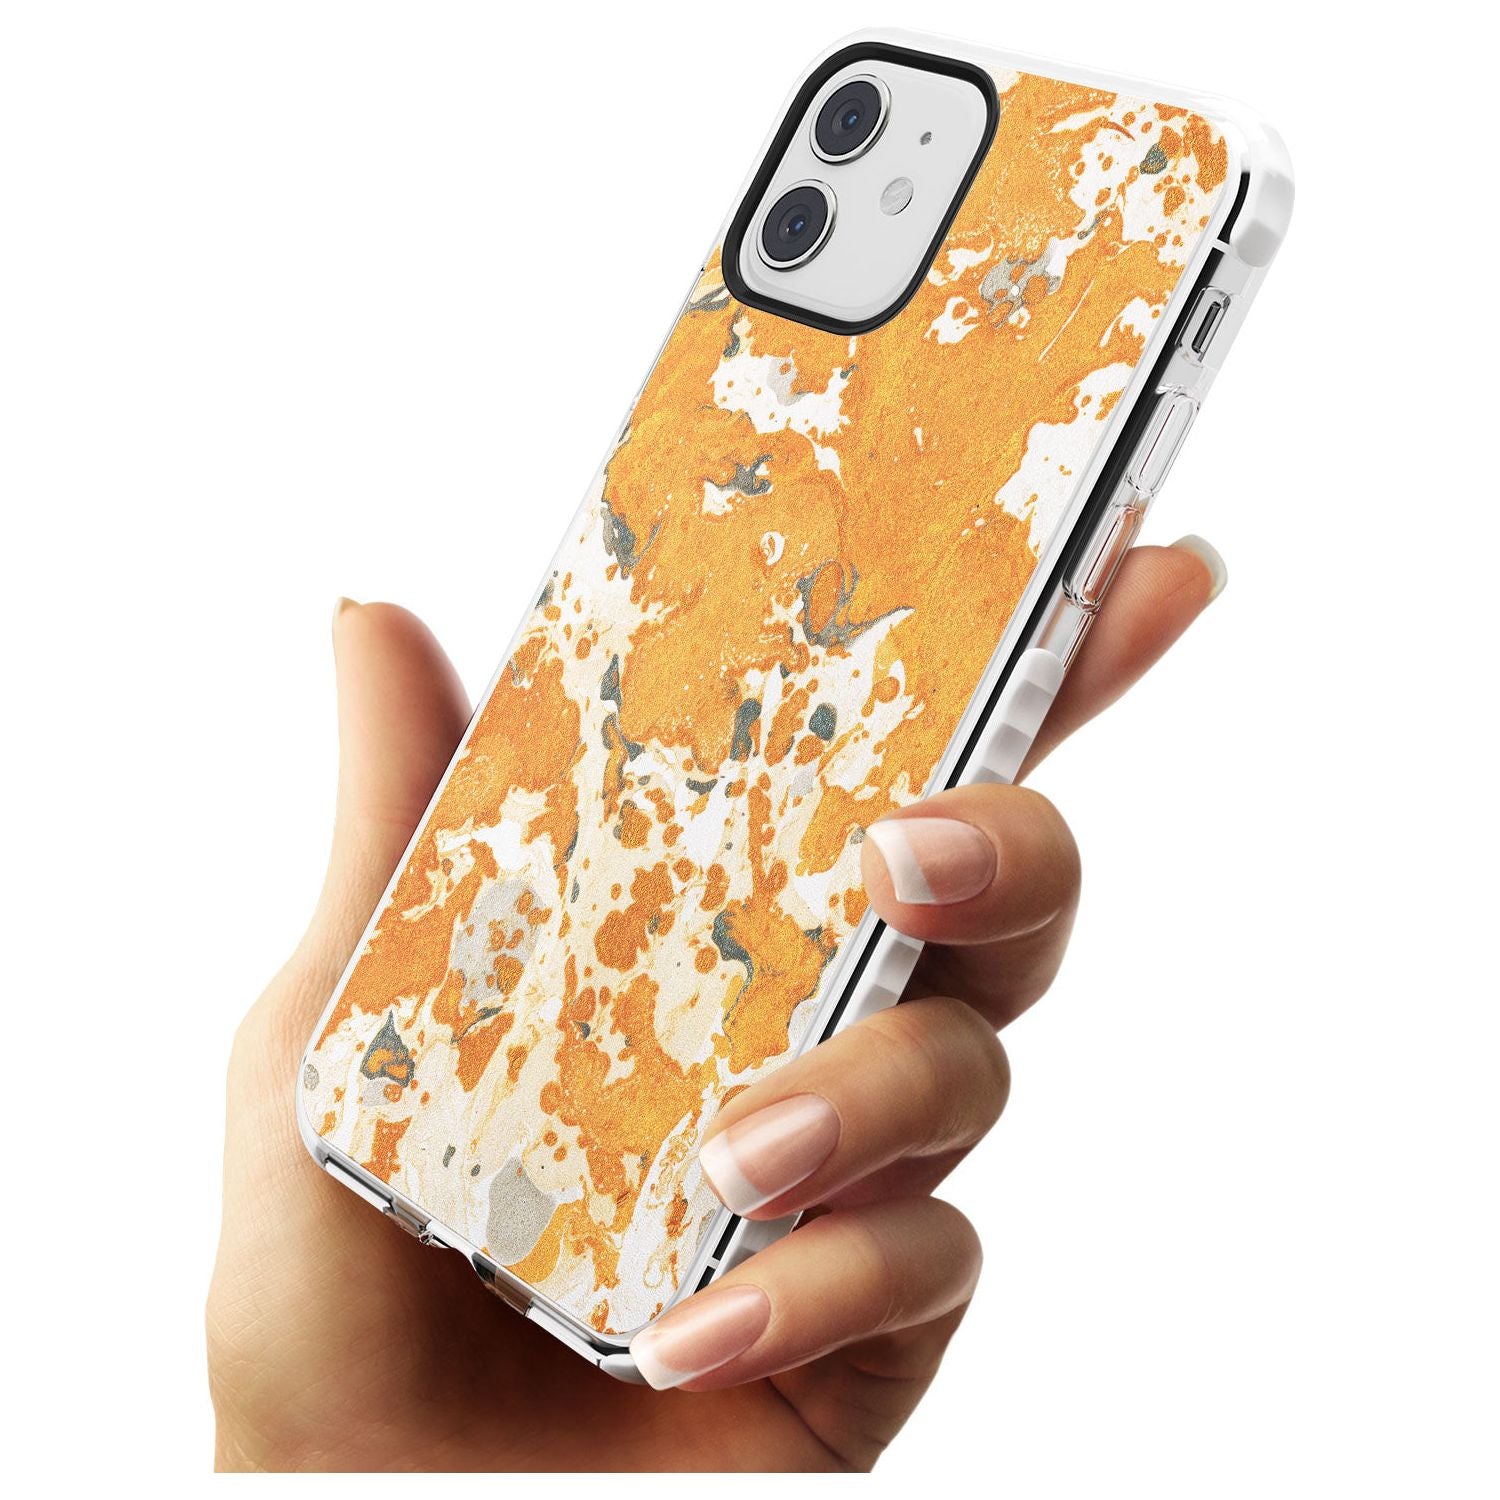 Orange Marbled Paper Pattern Impact Phone Case for iPhone 11